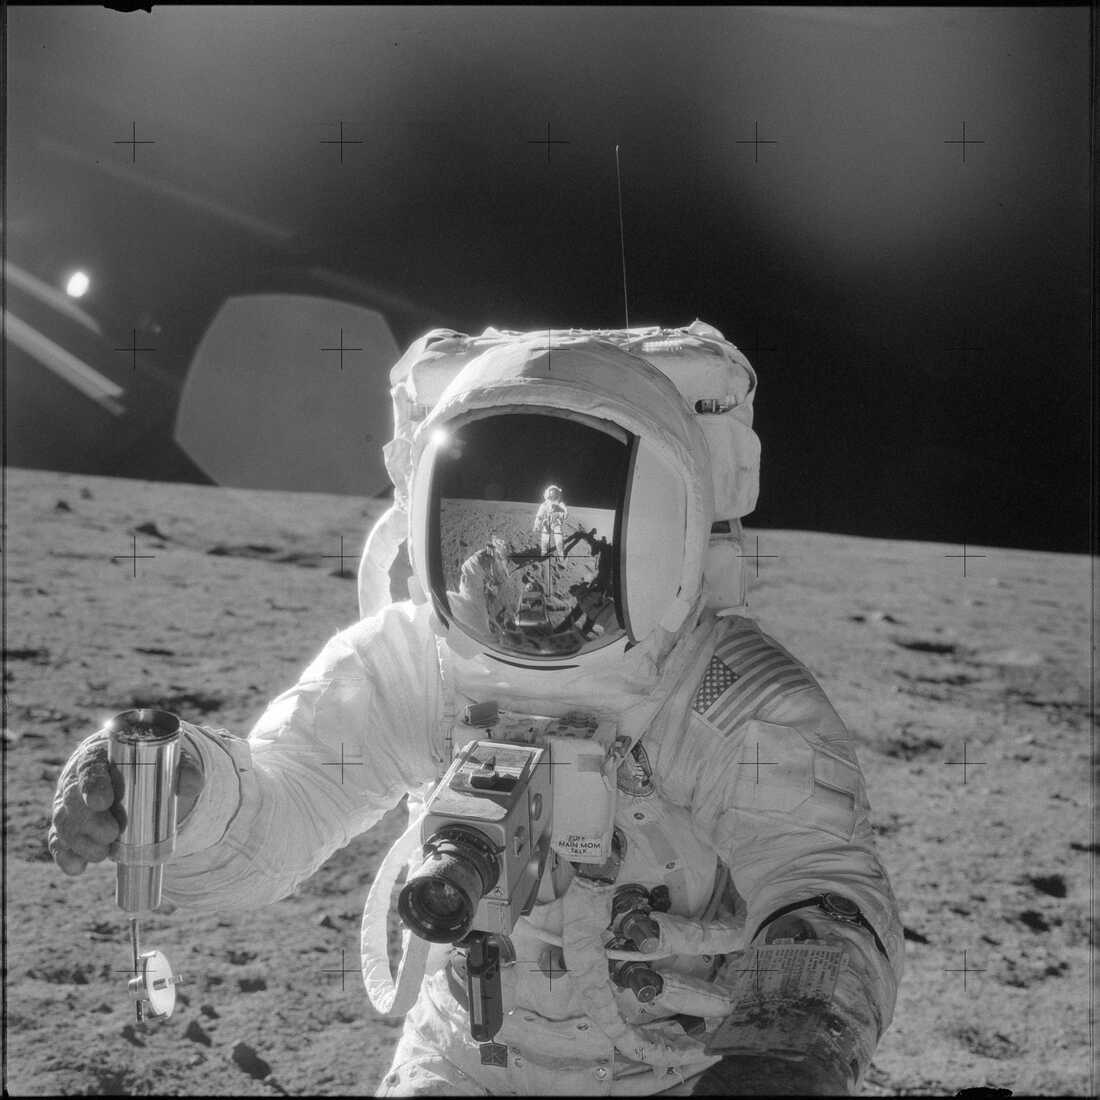 How NASA Chose The Camera That Went To The Moon